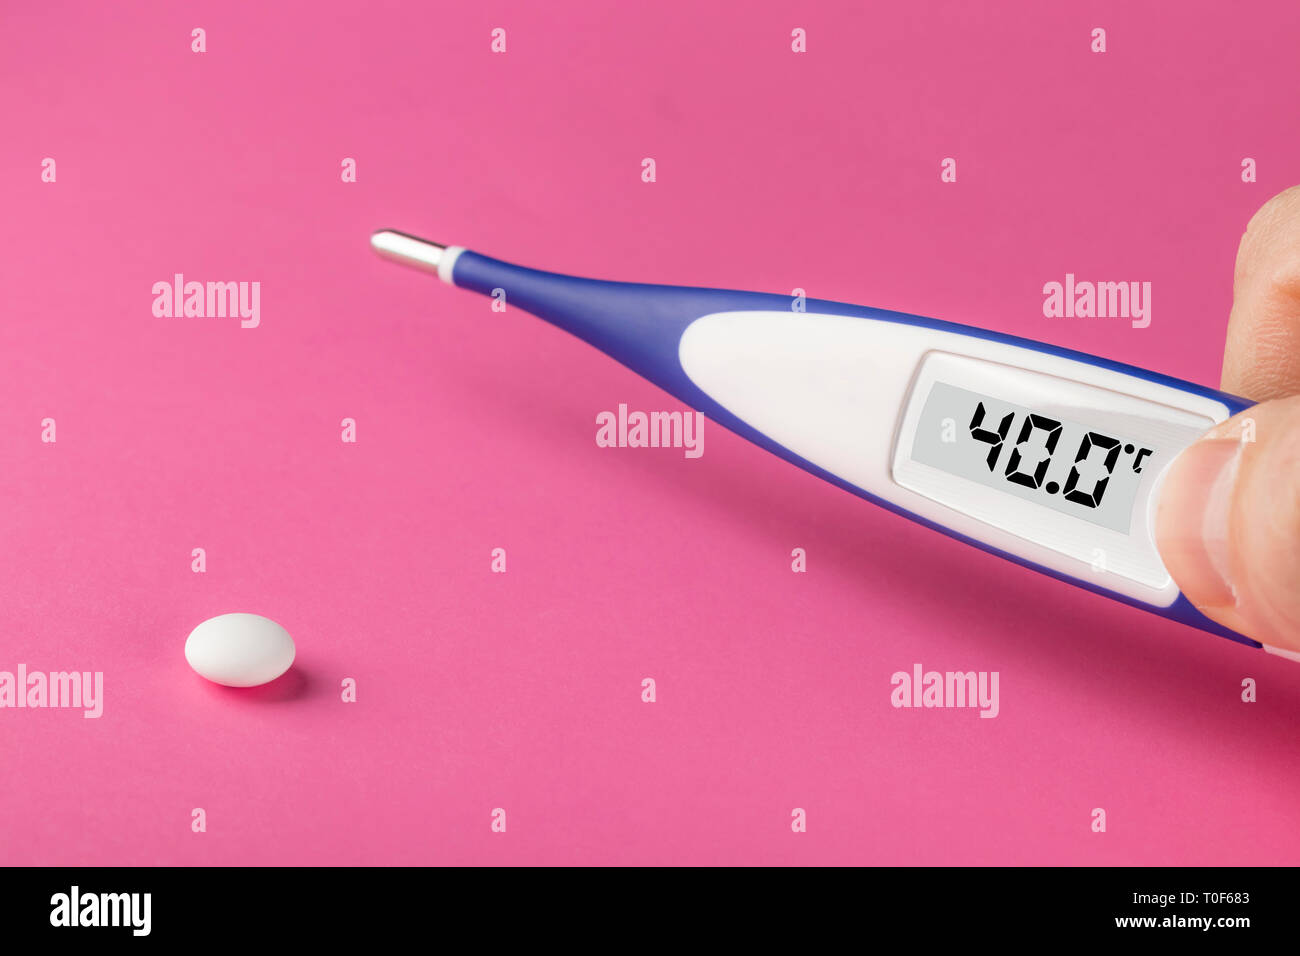 Electronic thermometer and pill on a pink background. High temperature 40 degrees Celsius on display. Copy space. Stock Photo